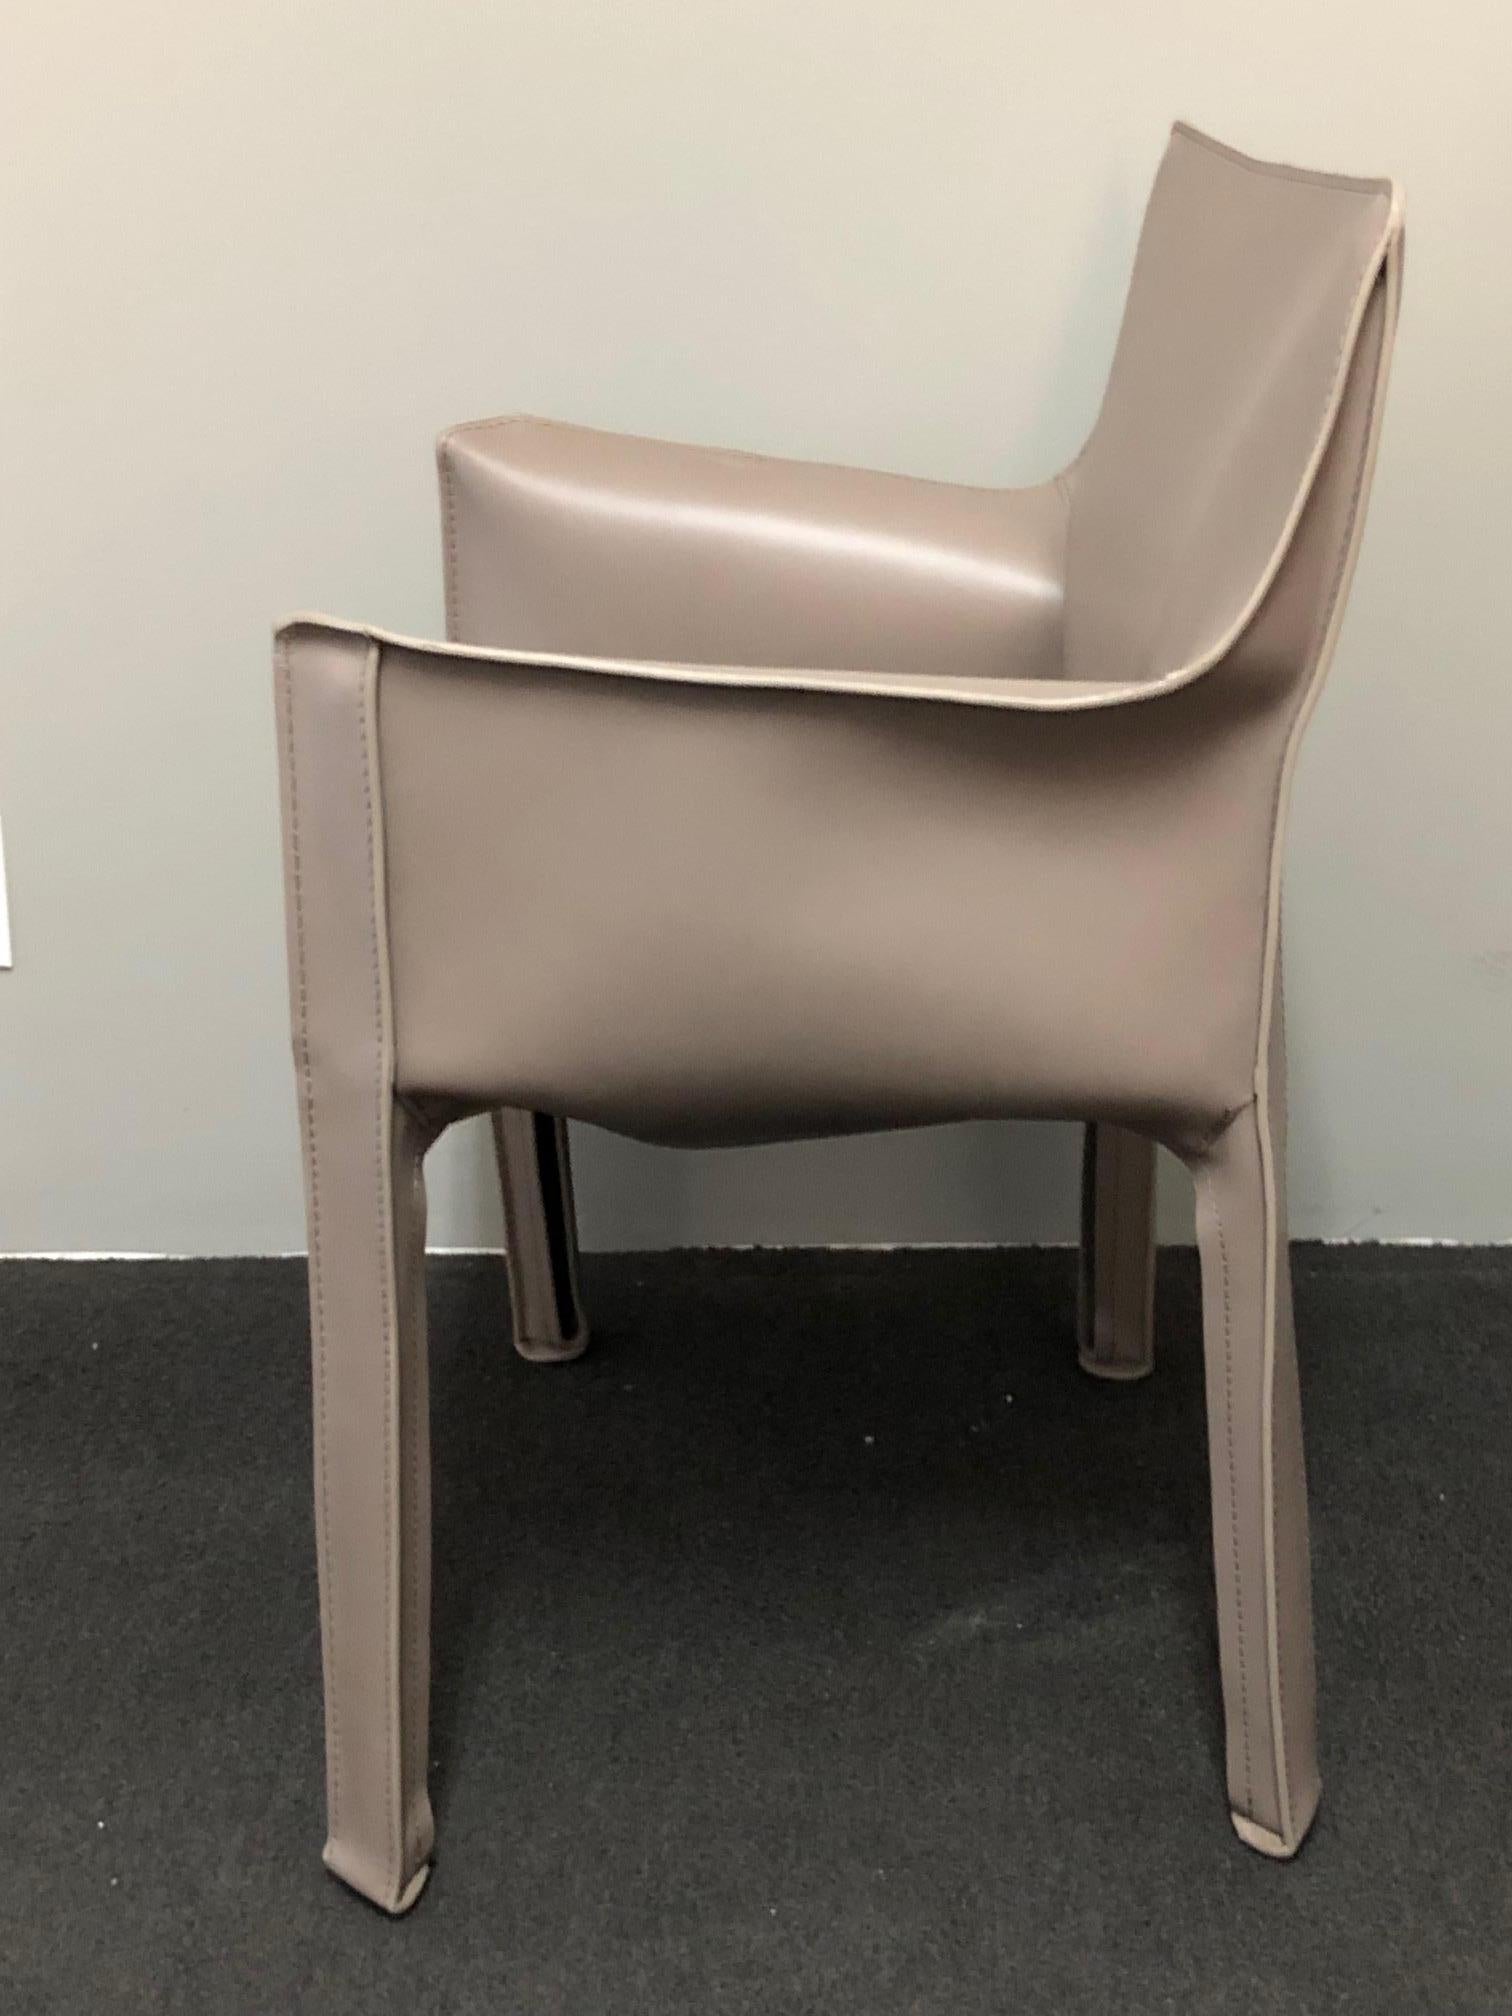 Armchair with enamelled steel frame. The seat is padded with polyurethane foam. Leather upholstery zippered over the frame, in taupe colour.
CAB was designed in answer to deep questions regarding the exact nature of the semantic meaning of